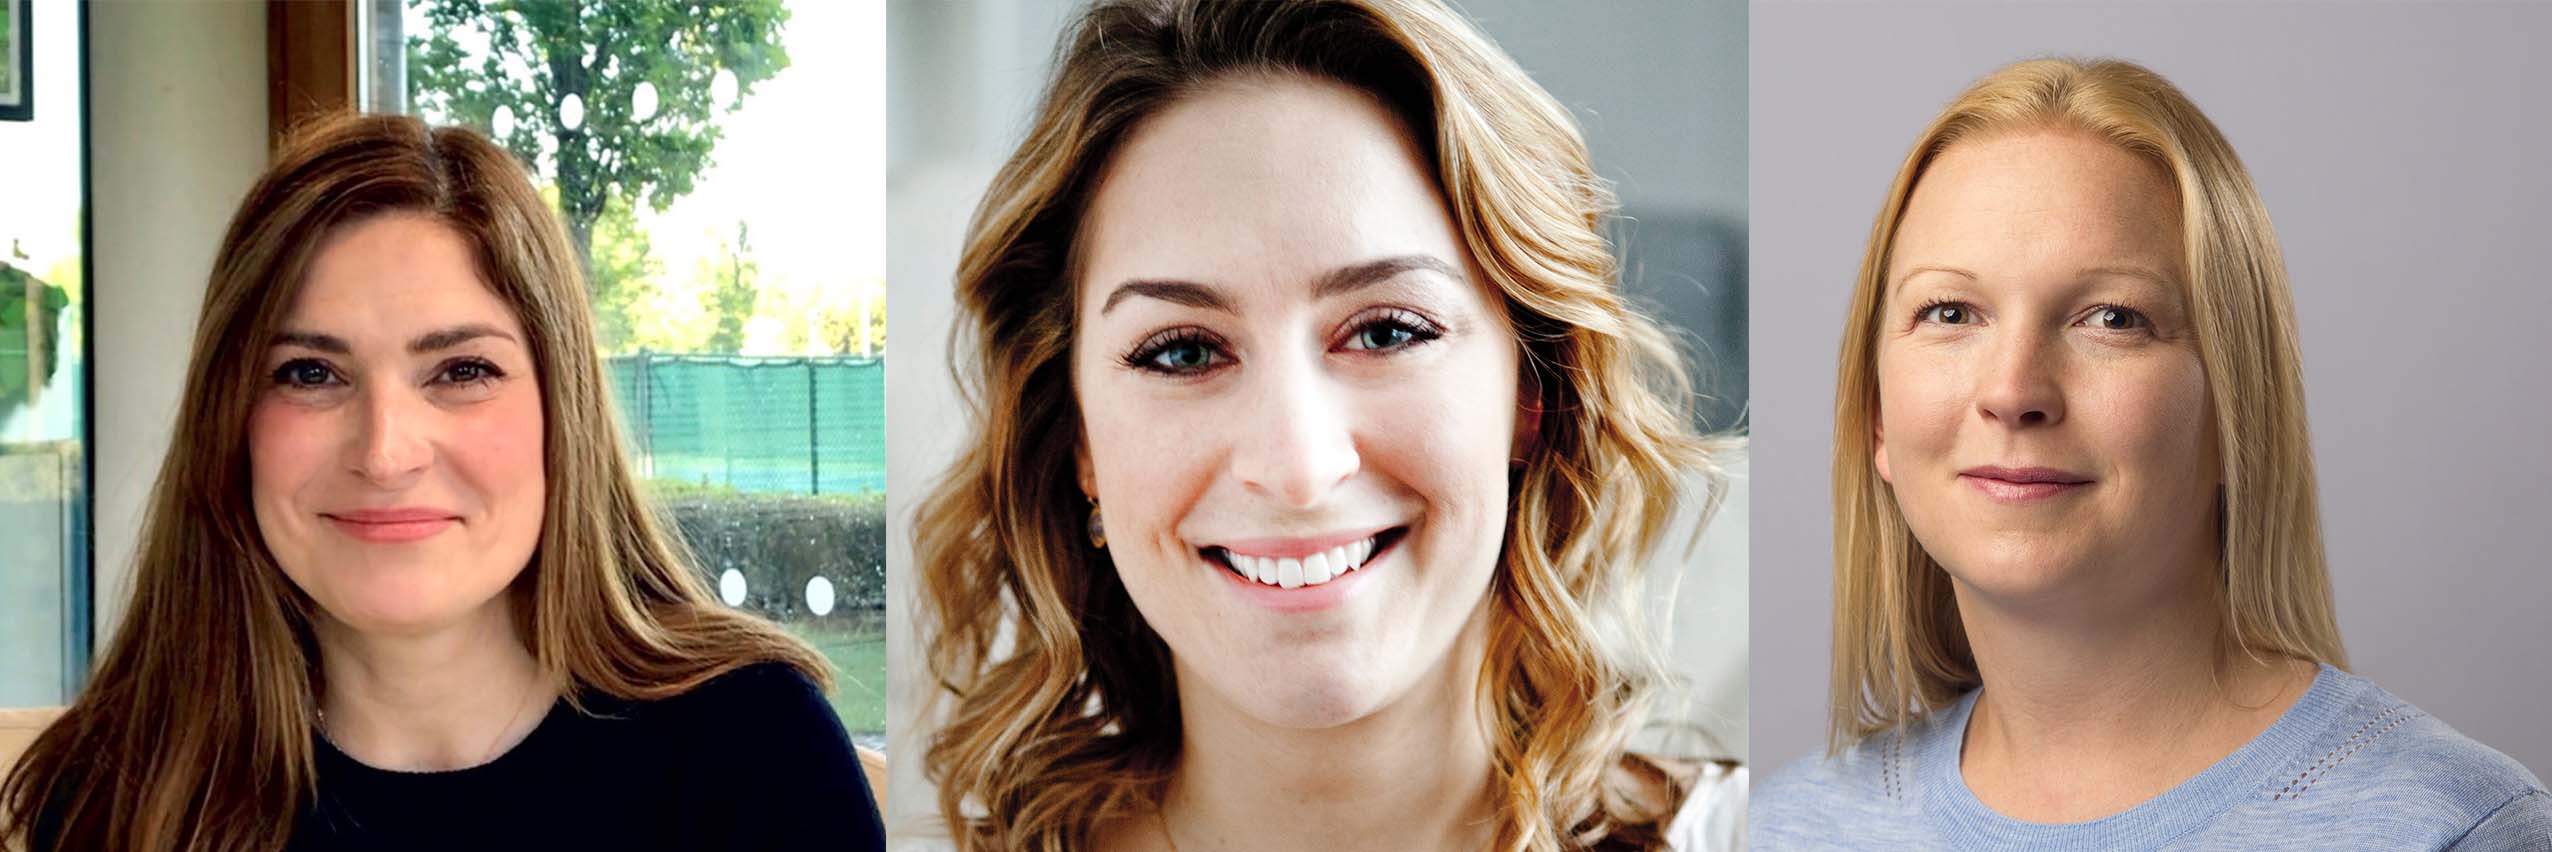 Amy williams, victoria o’byrne and katy cox join ukactive board of directors